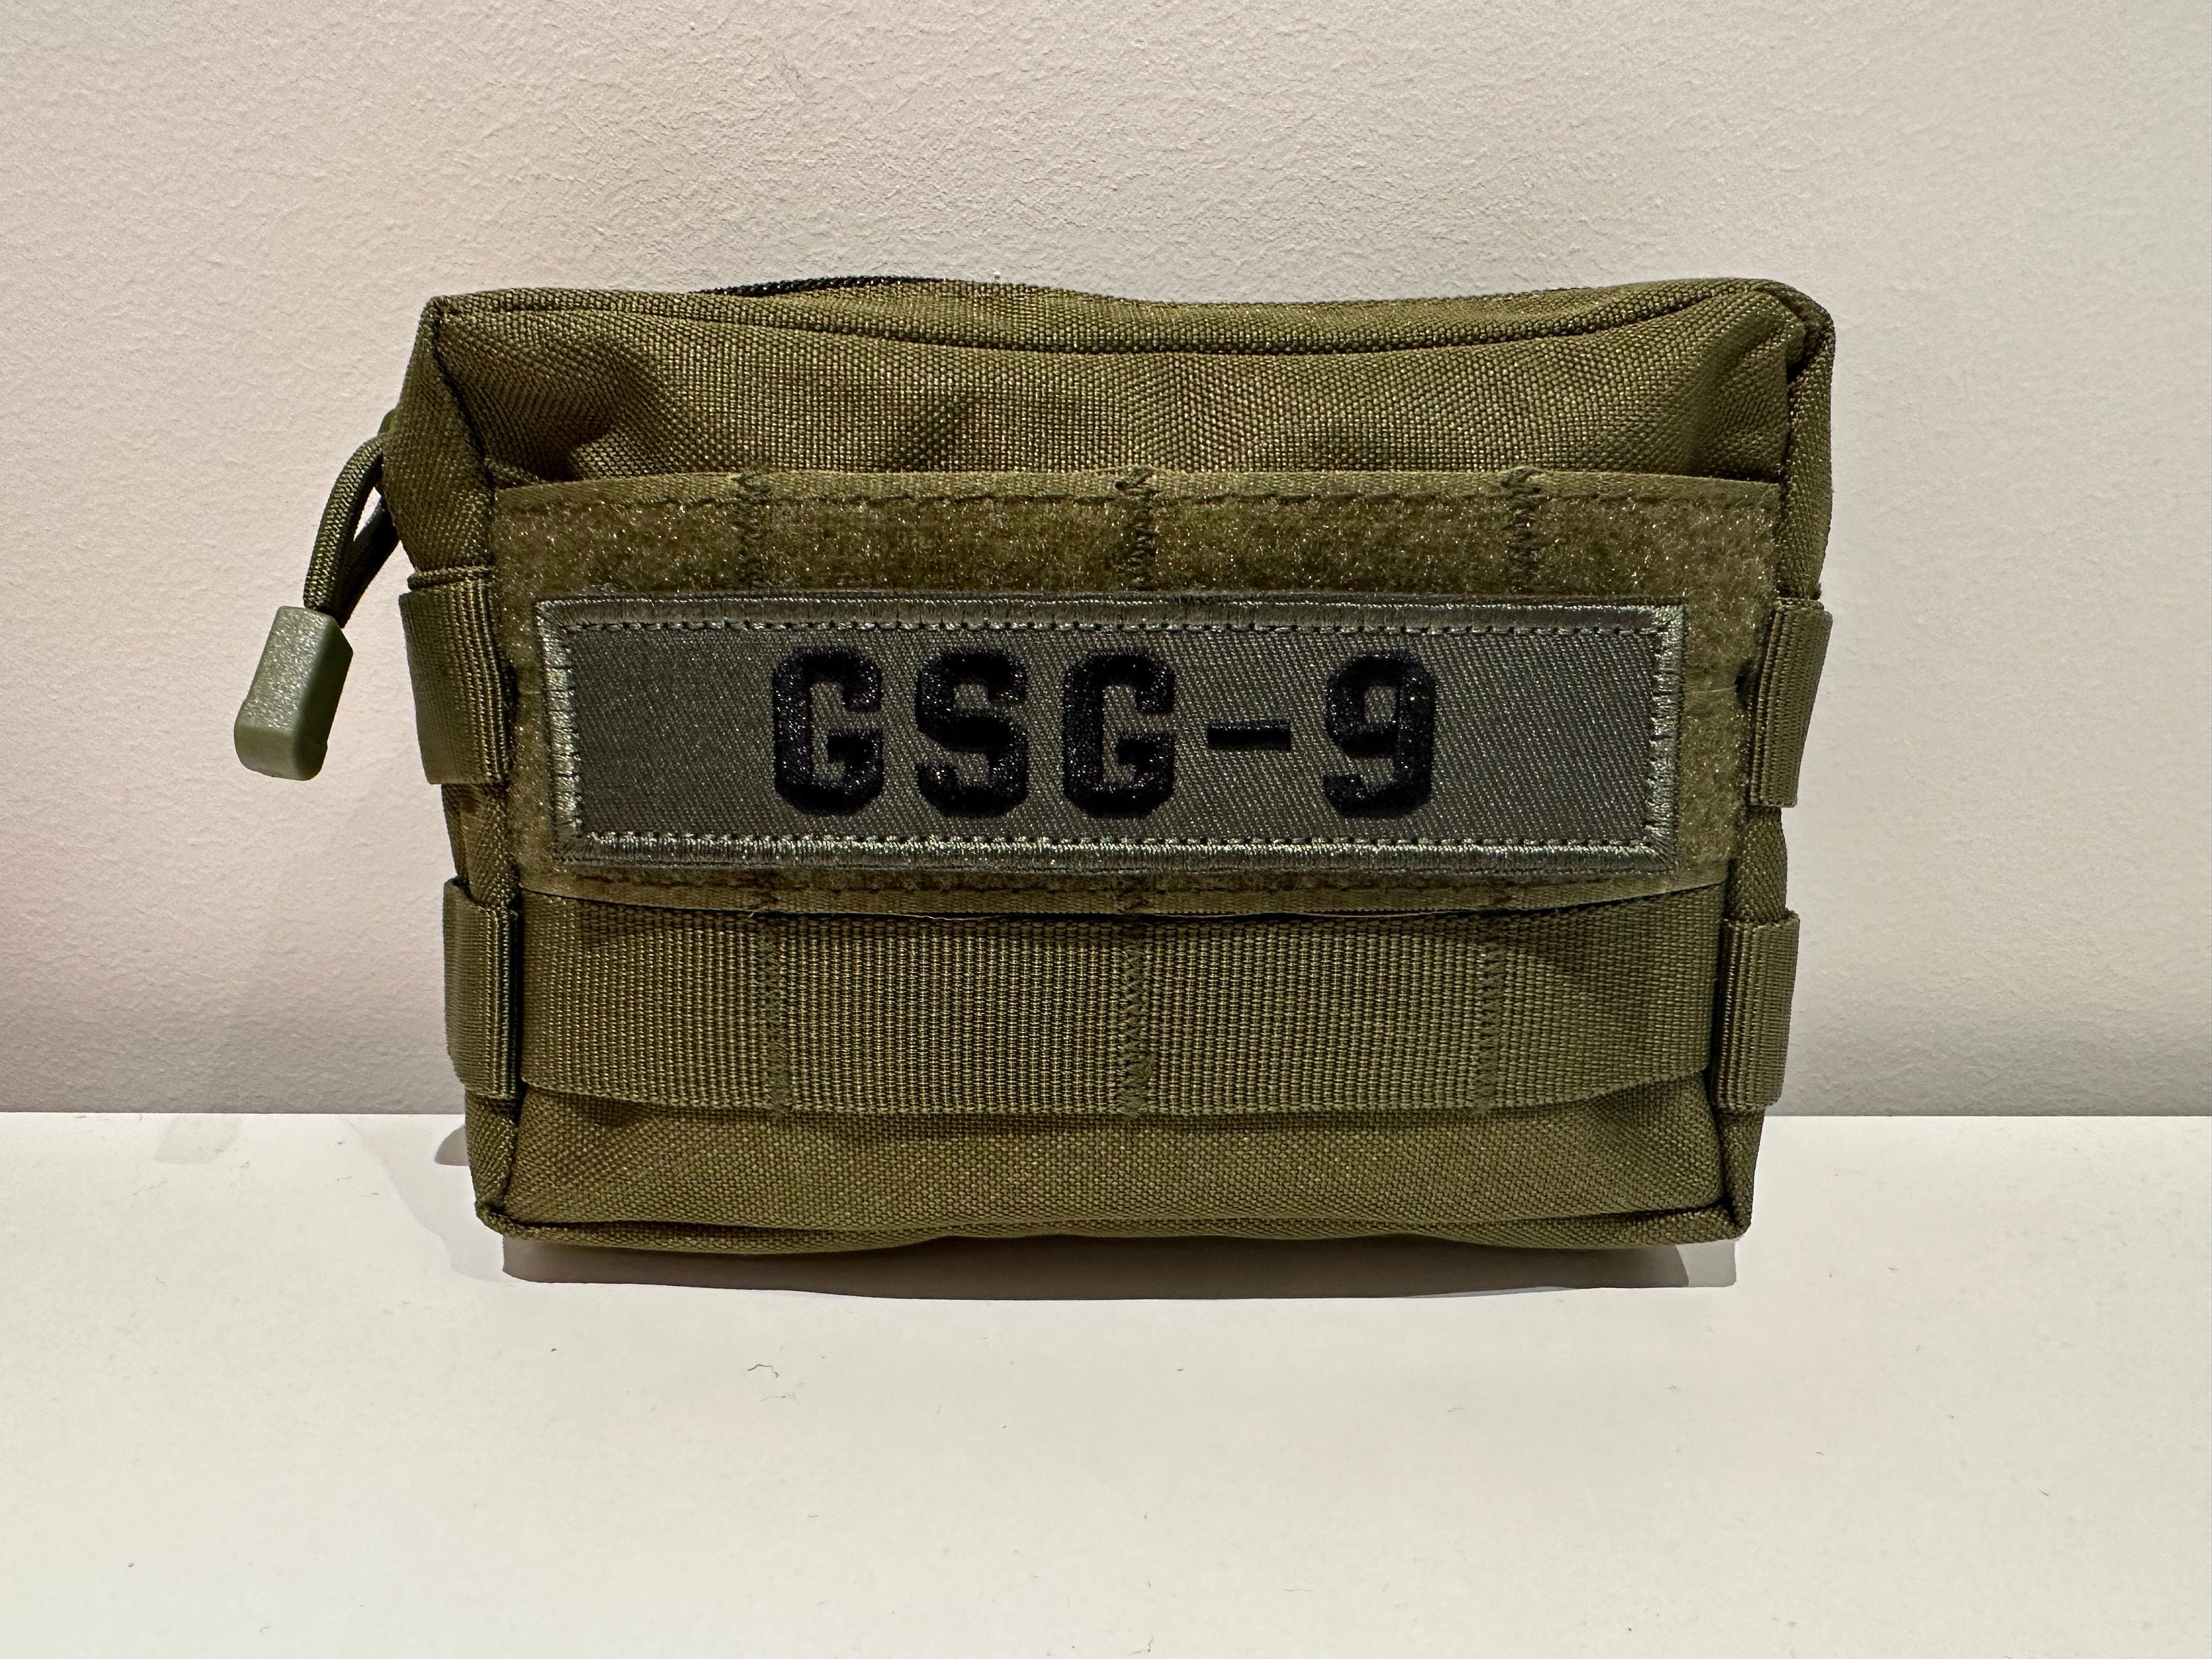 Tactical Molle Name Tag, Custom Made to Order Prepper 